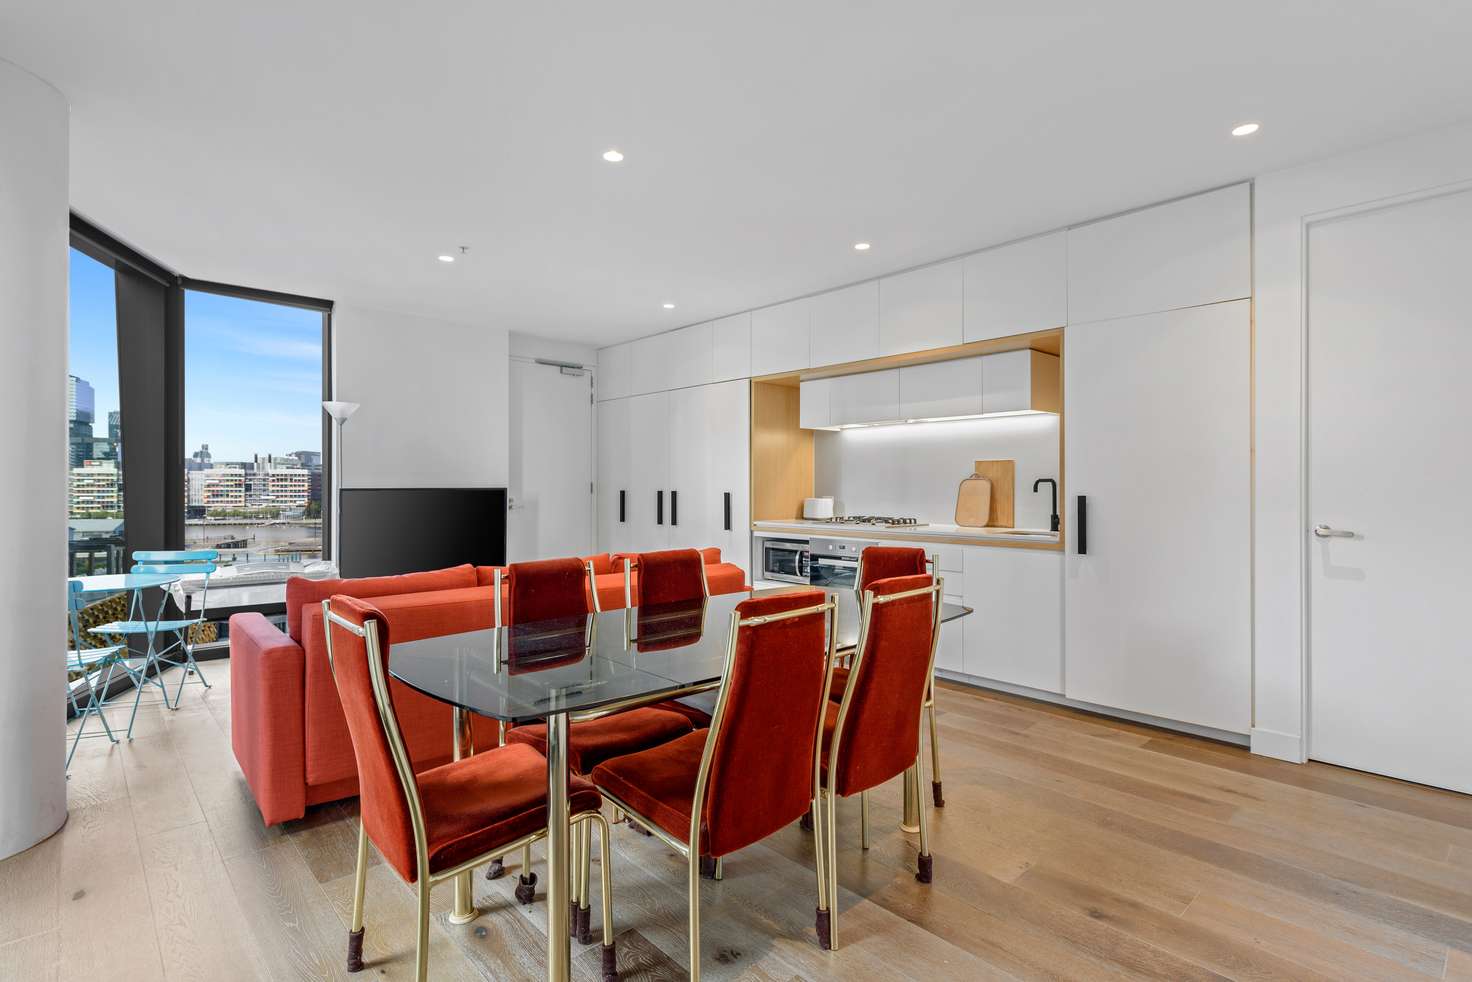 Main view of Homely apartment listing, 713/15 Doepel Way, Docklands VIC 3008